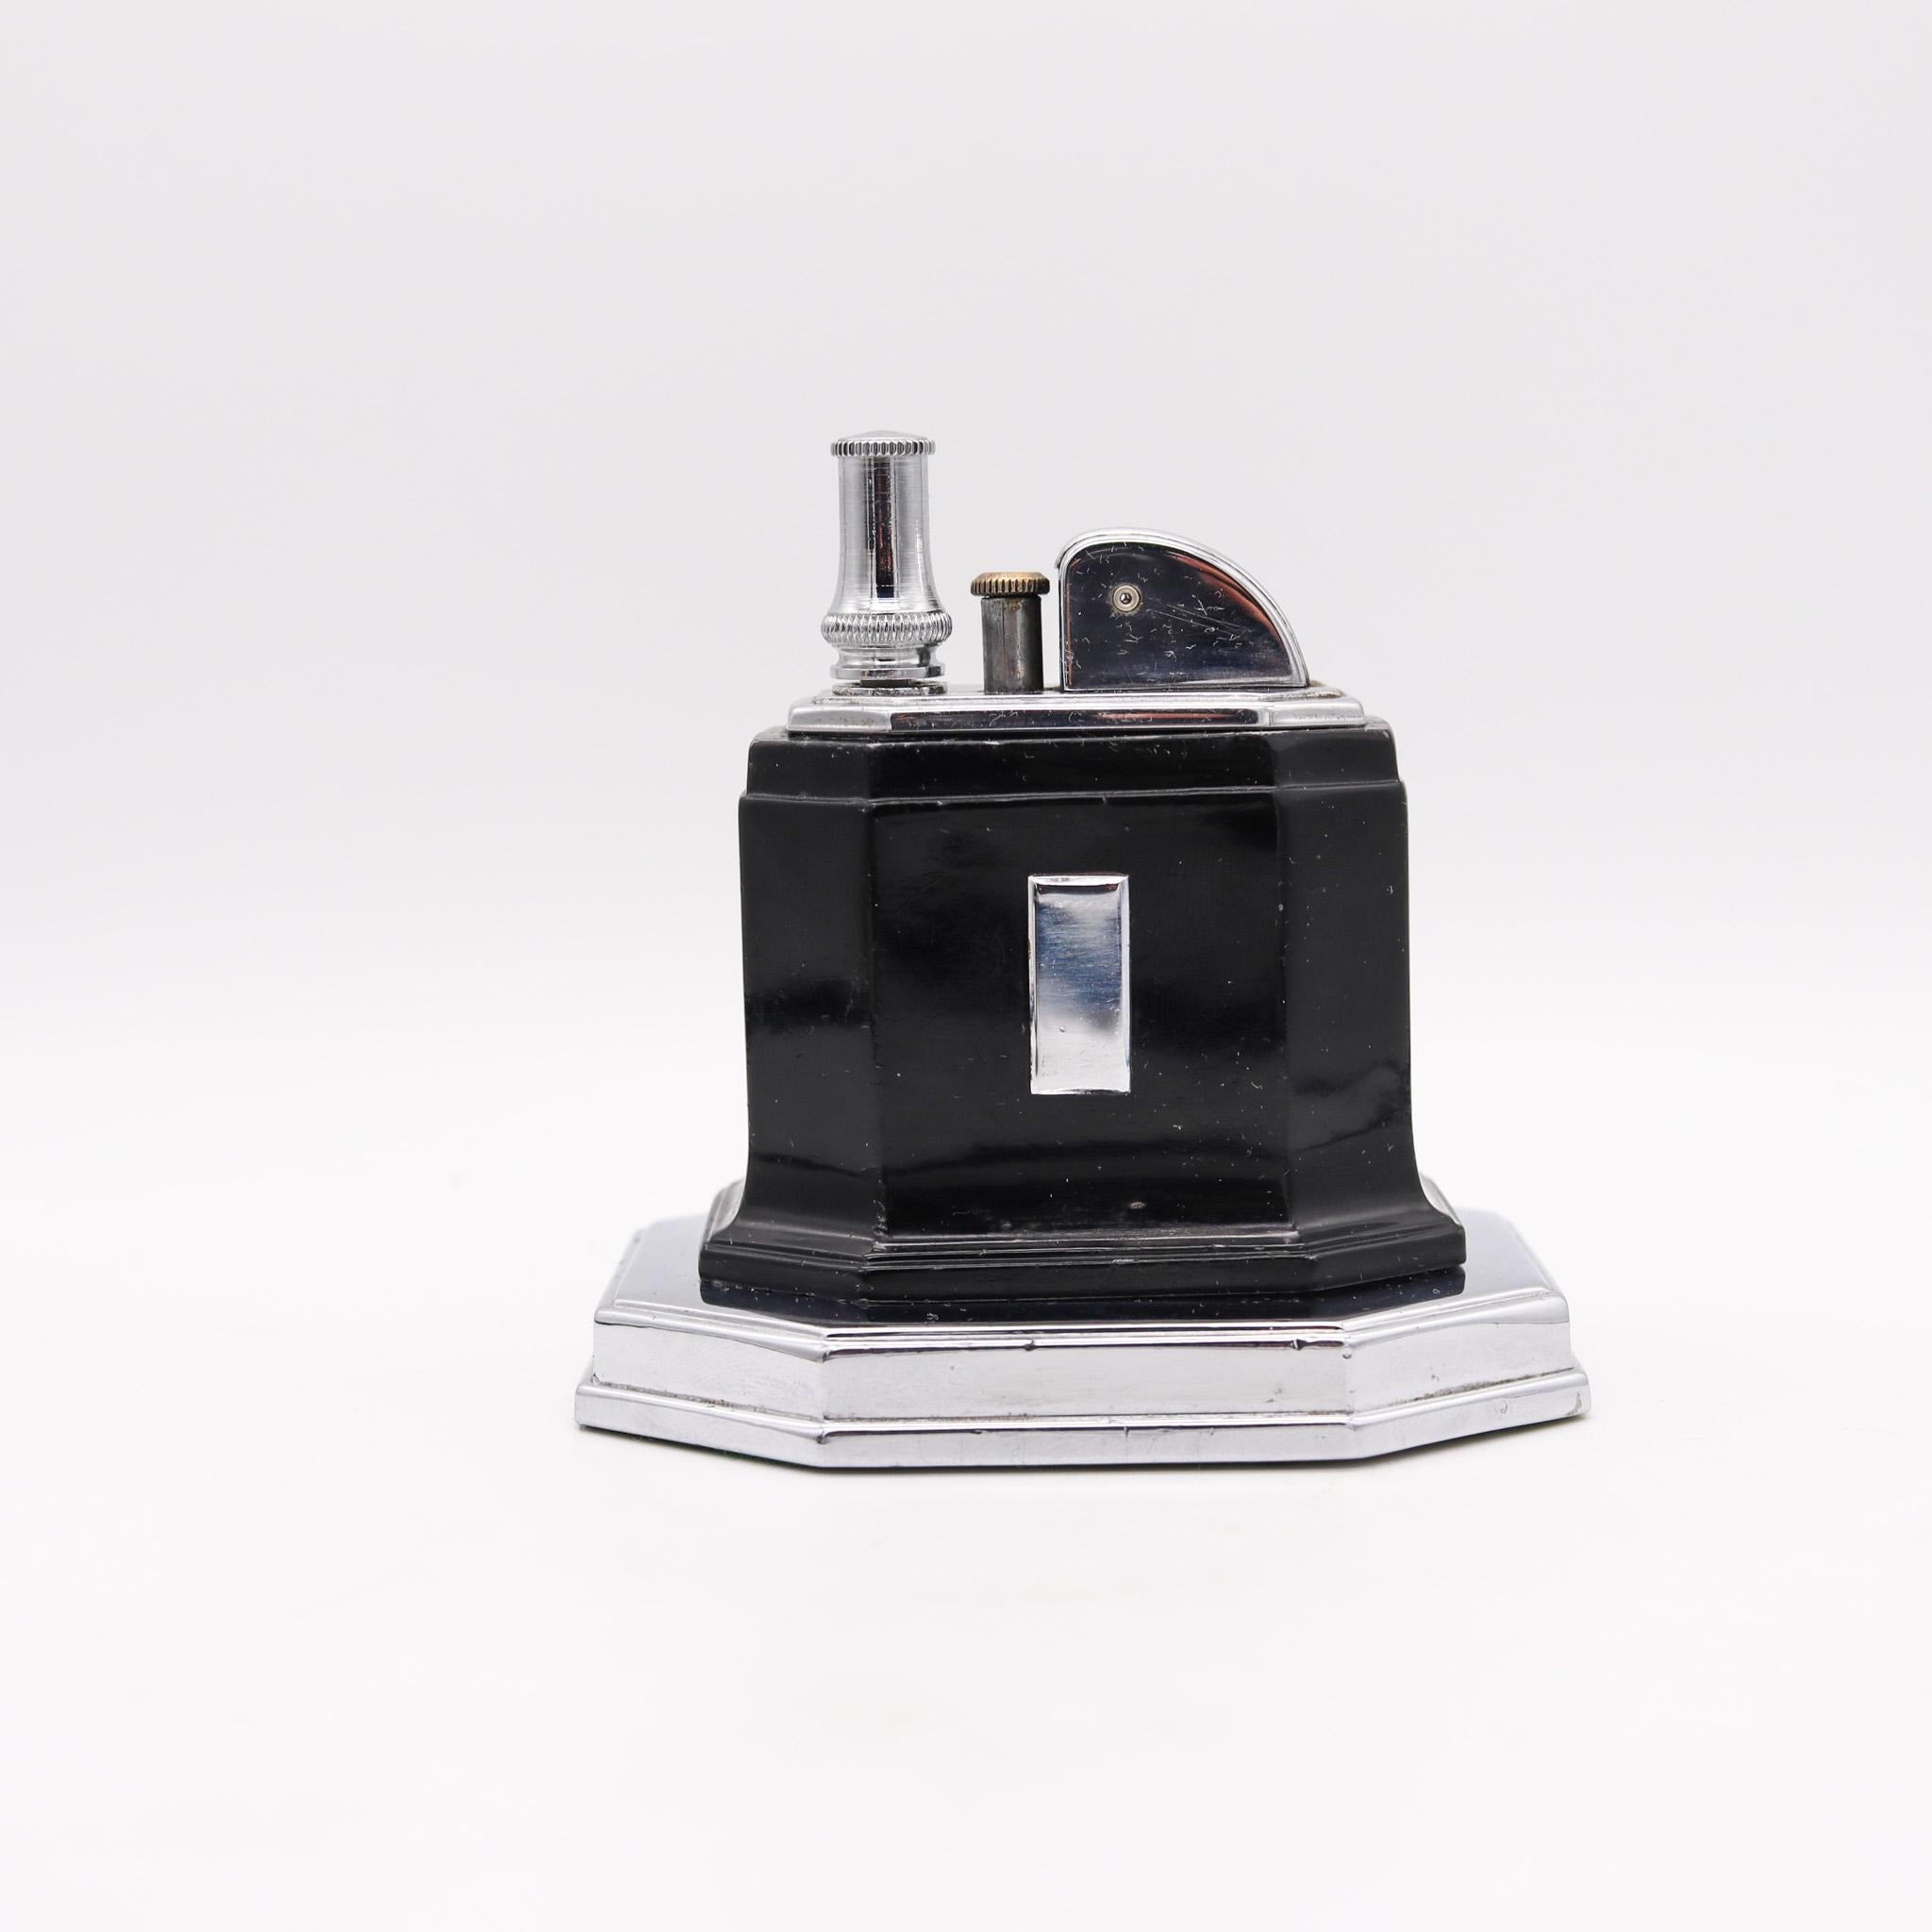 A desk lighter designed by Ronson.

This Ronson Touch-Tip Octette table lighter was made between 1935 and 1951 by the Ronson Art Metal Works Inc. located in Newark, New Jersey in the United States. This lighter began a very successful era for